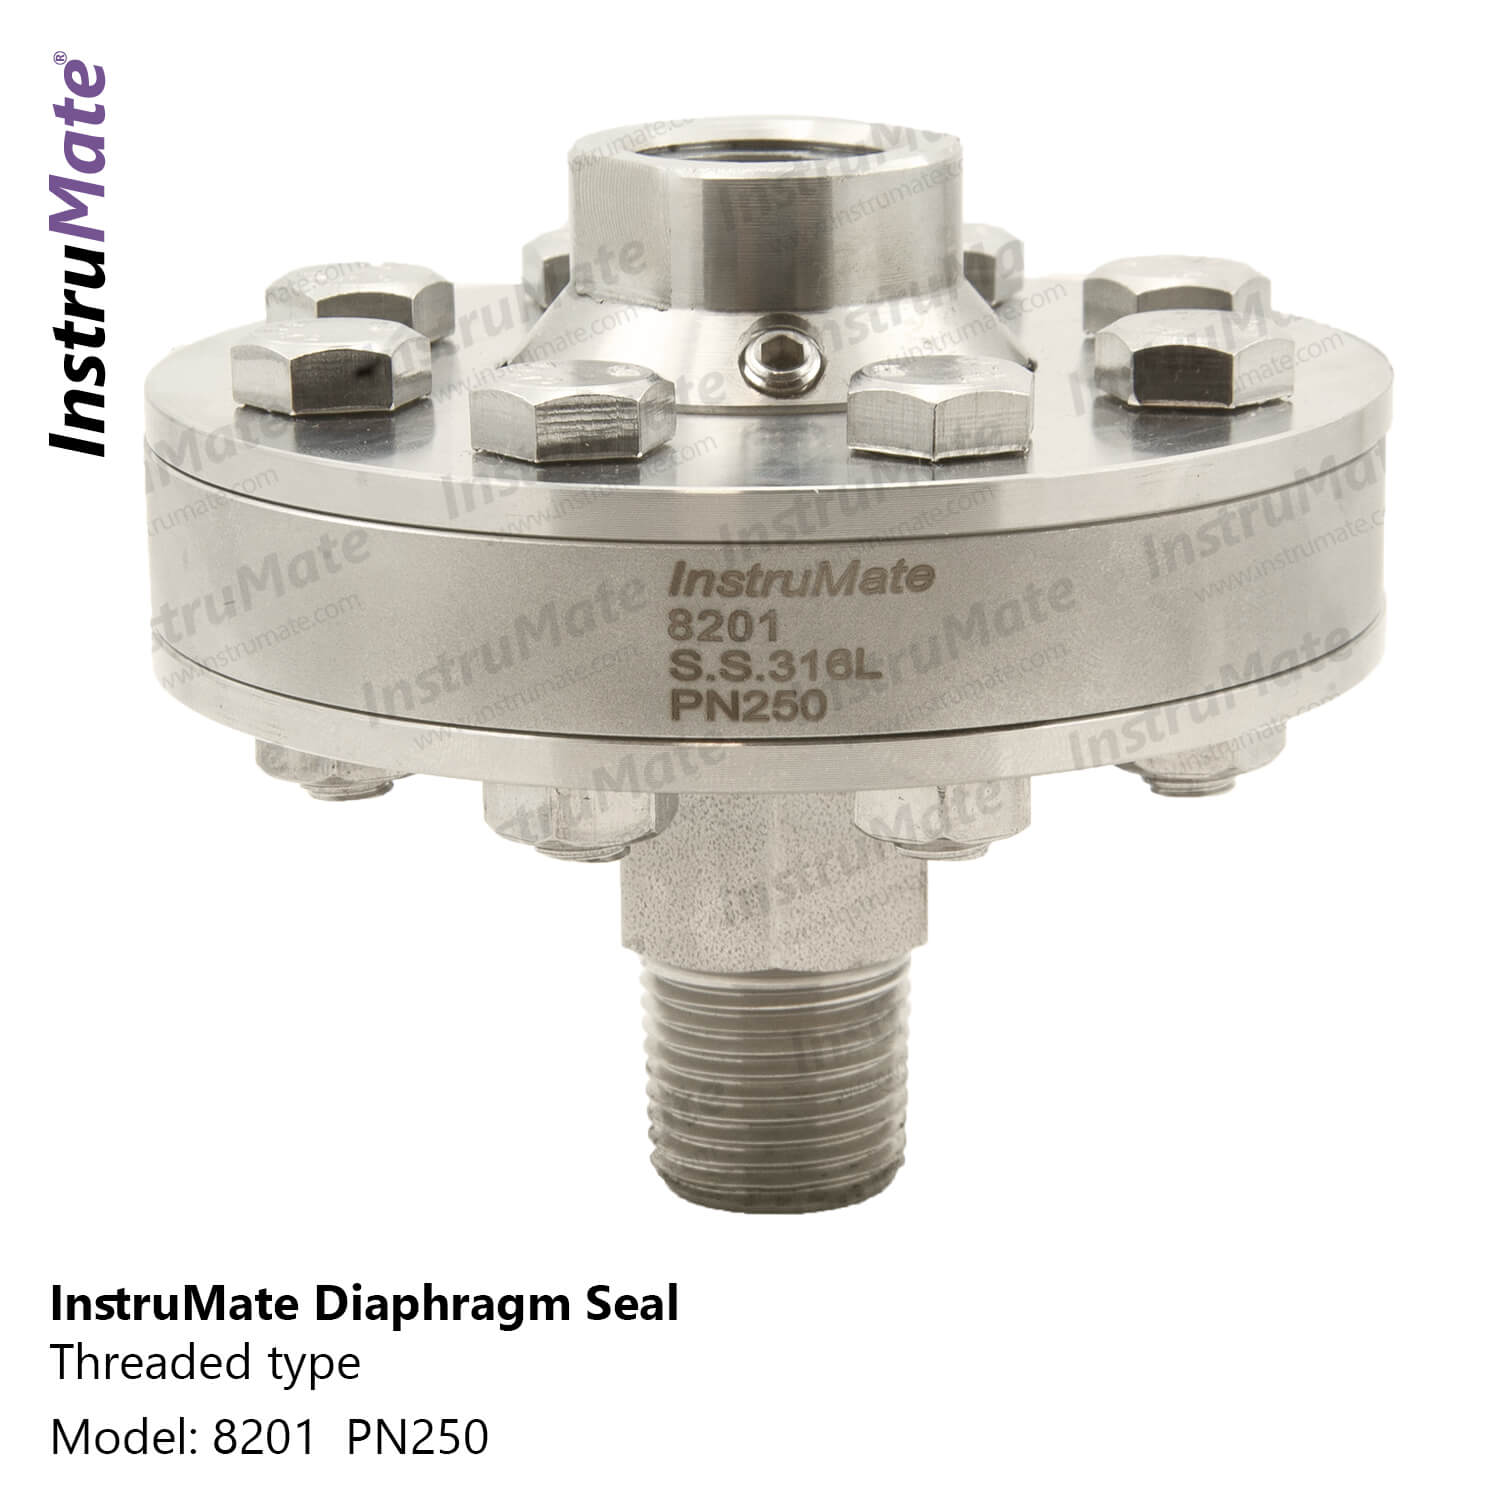 Diaphragm seal with threaded connection - 8201 - InstruMate